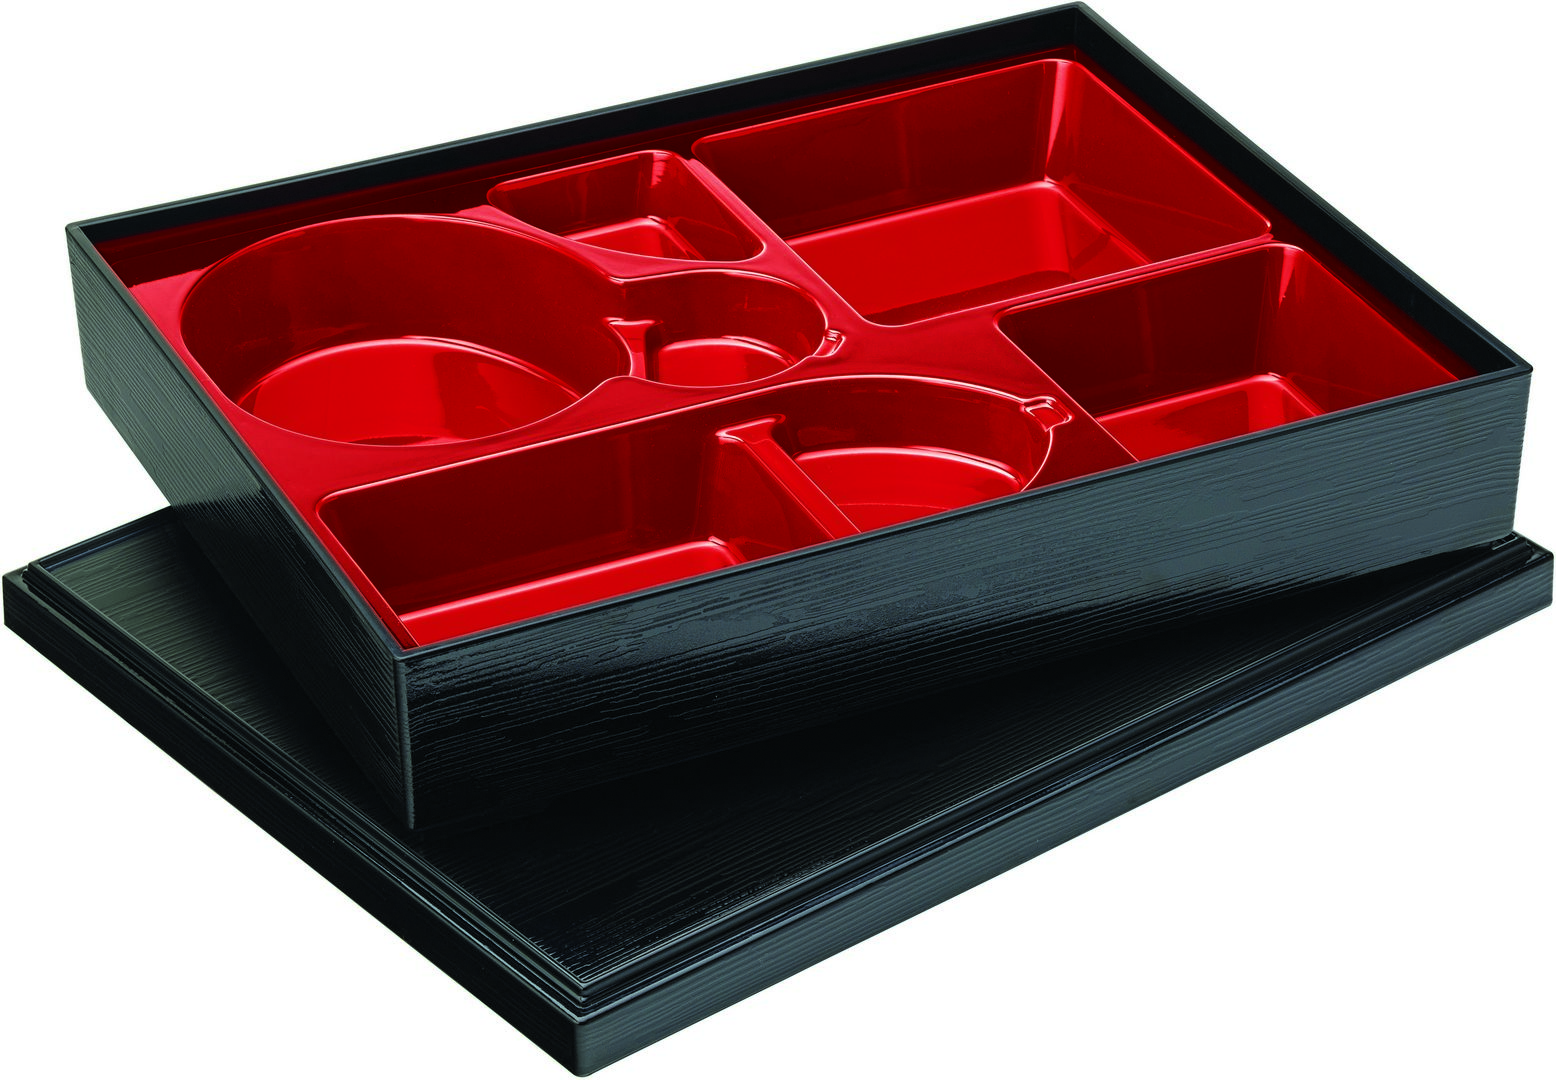 Luxe Bento Box (32.5 x 25.5 x 6.5cm) 5 compartment - JMP303-000000-B01006 (Pack of 6)